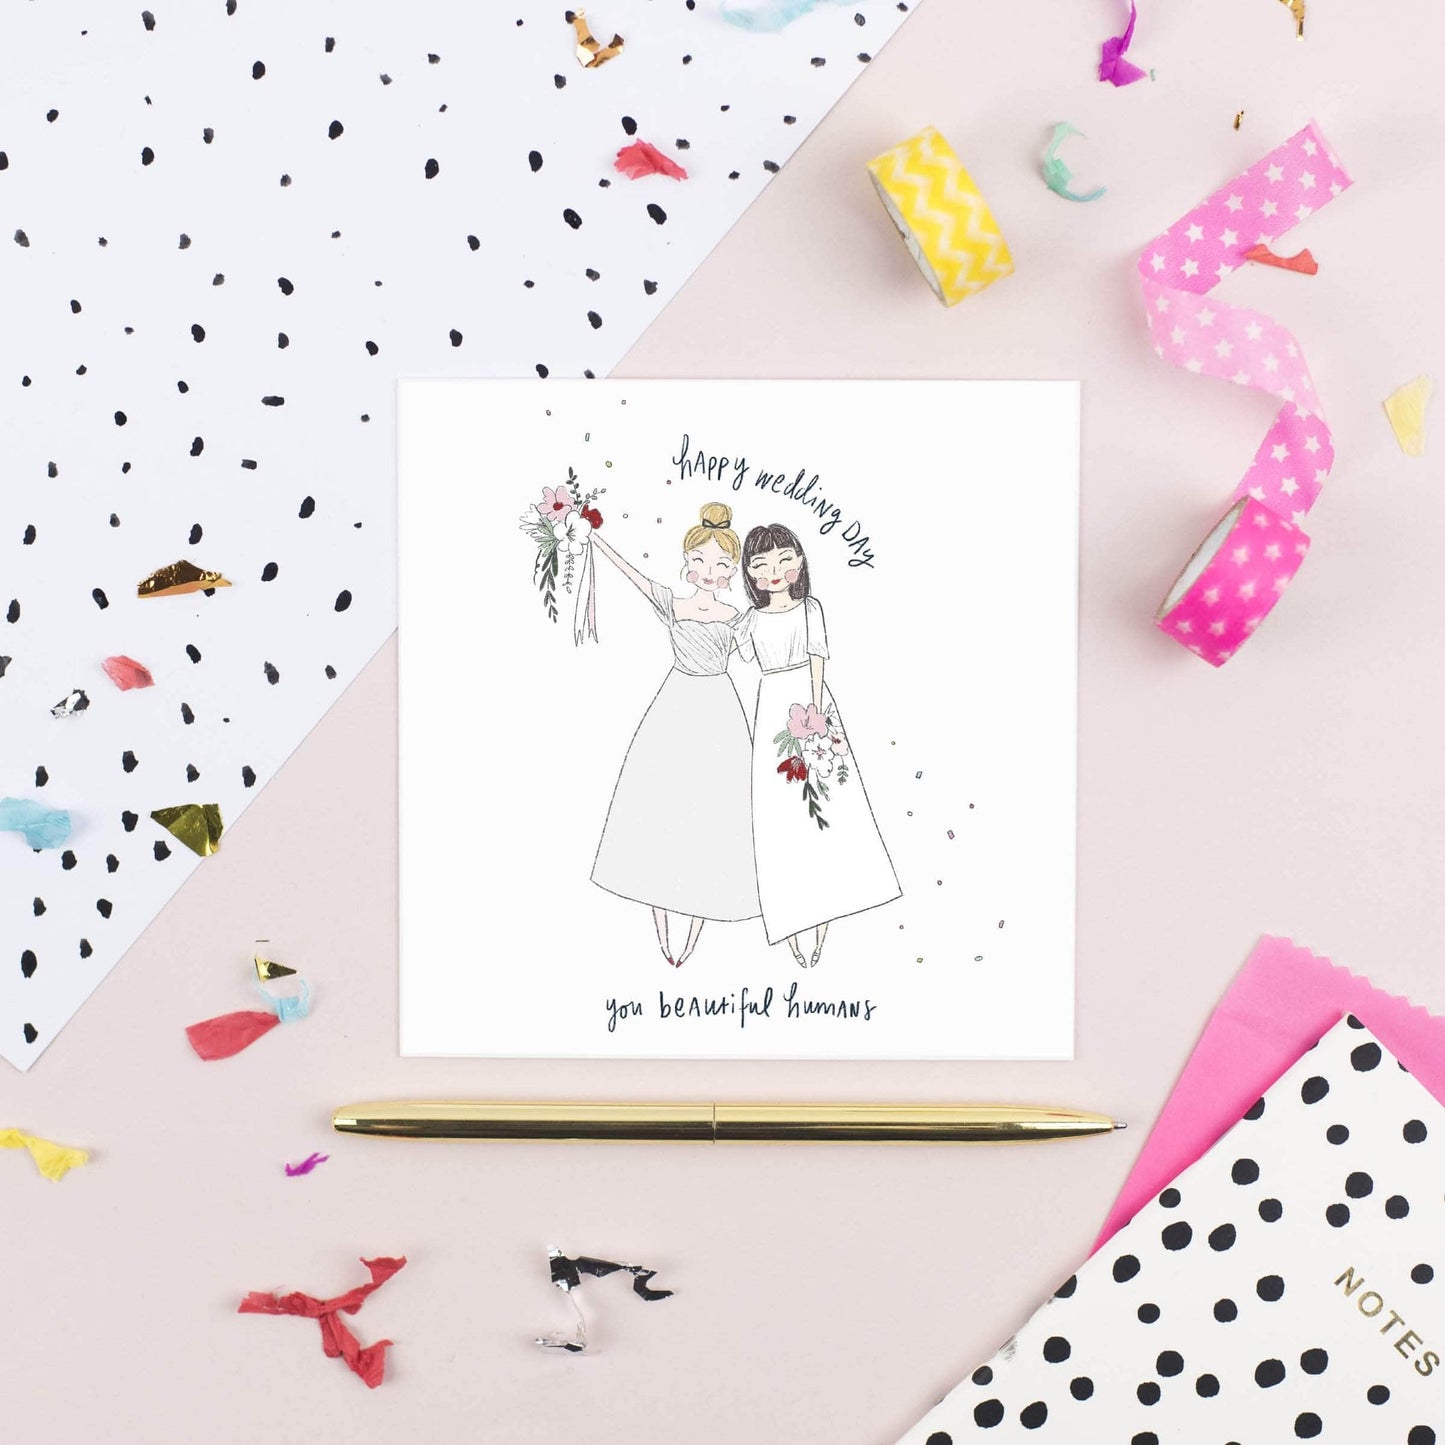 Load image into Gallery viewer, Pickled Pom Pom Cards Happy Wedding Day - Gals - Pickled Pom Pom Cards
